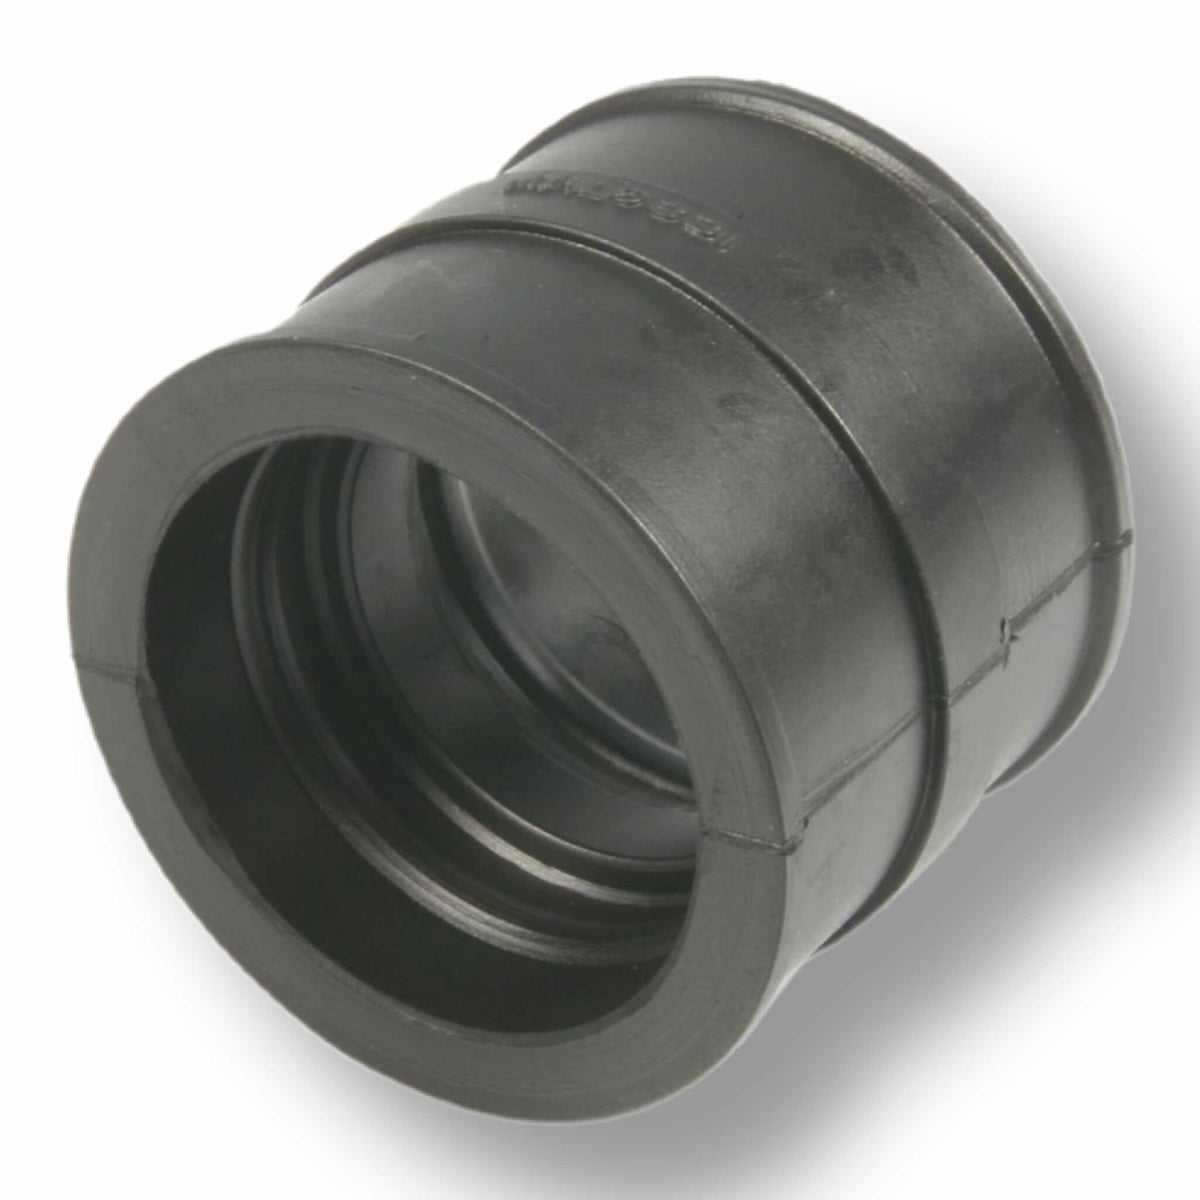 PHBH 28 30/VHS 24-30/TMX 27-30 PWK 28/30 MALOSSI Carburettor Inlet Connecting Rubber